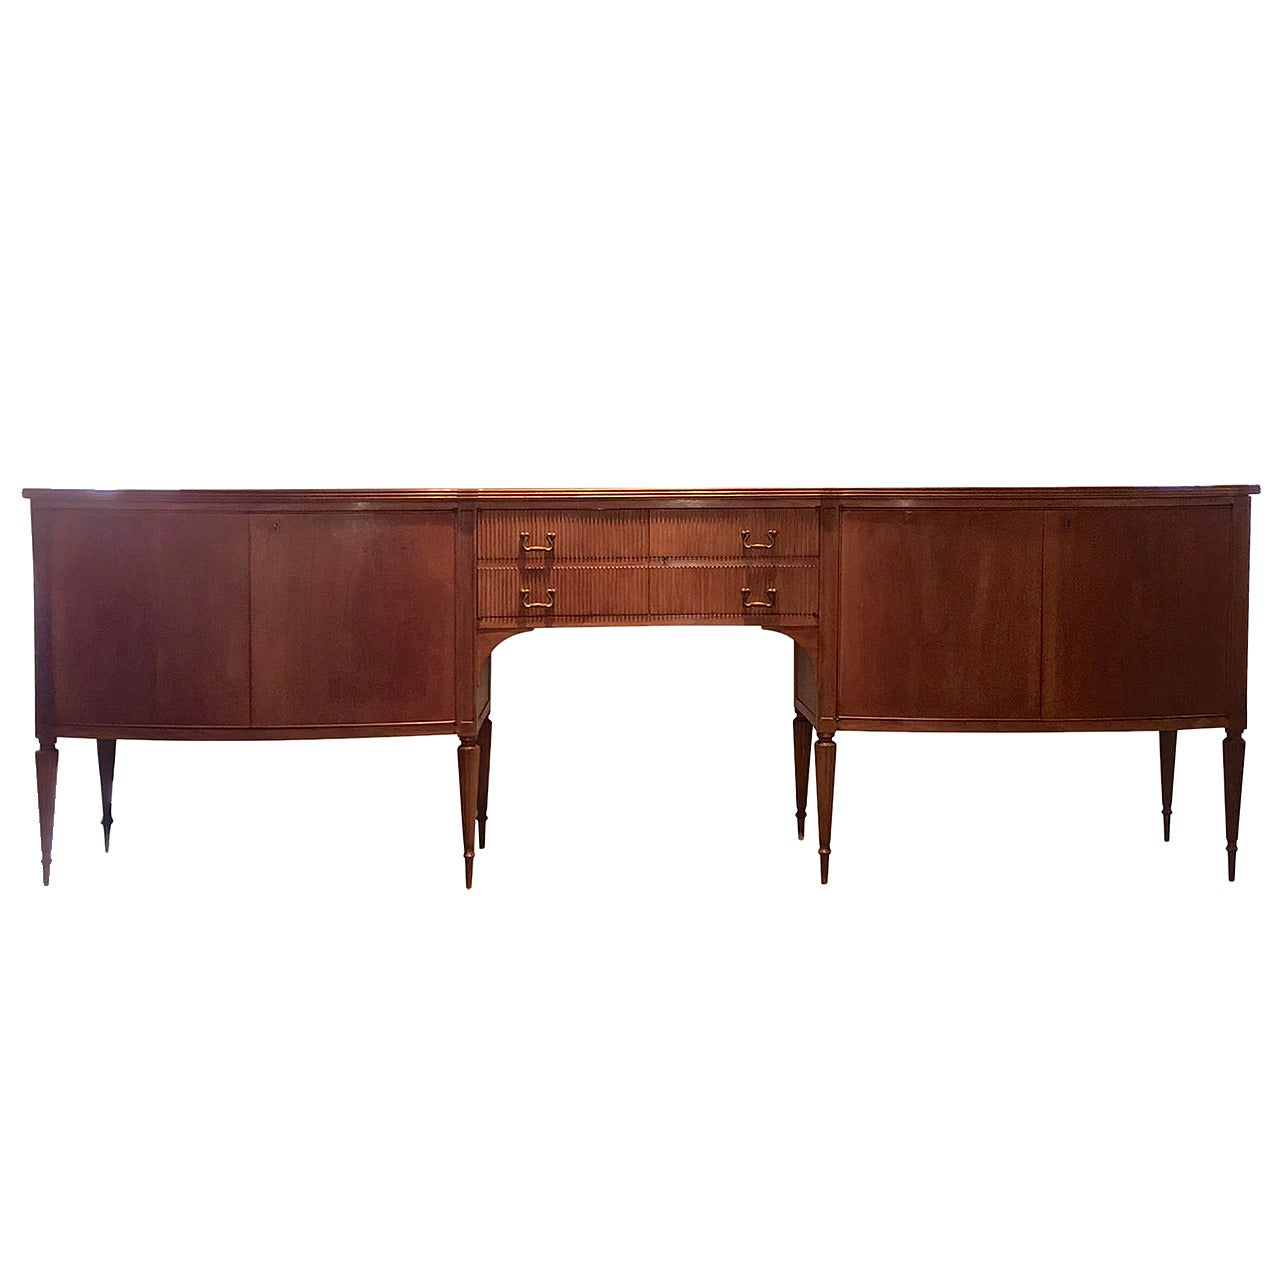 Italian Midcentury Sideboard in the Manner of Paola Buffa